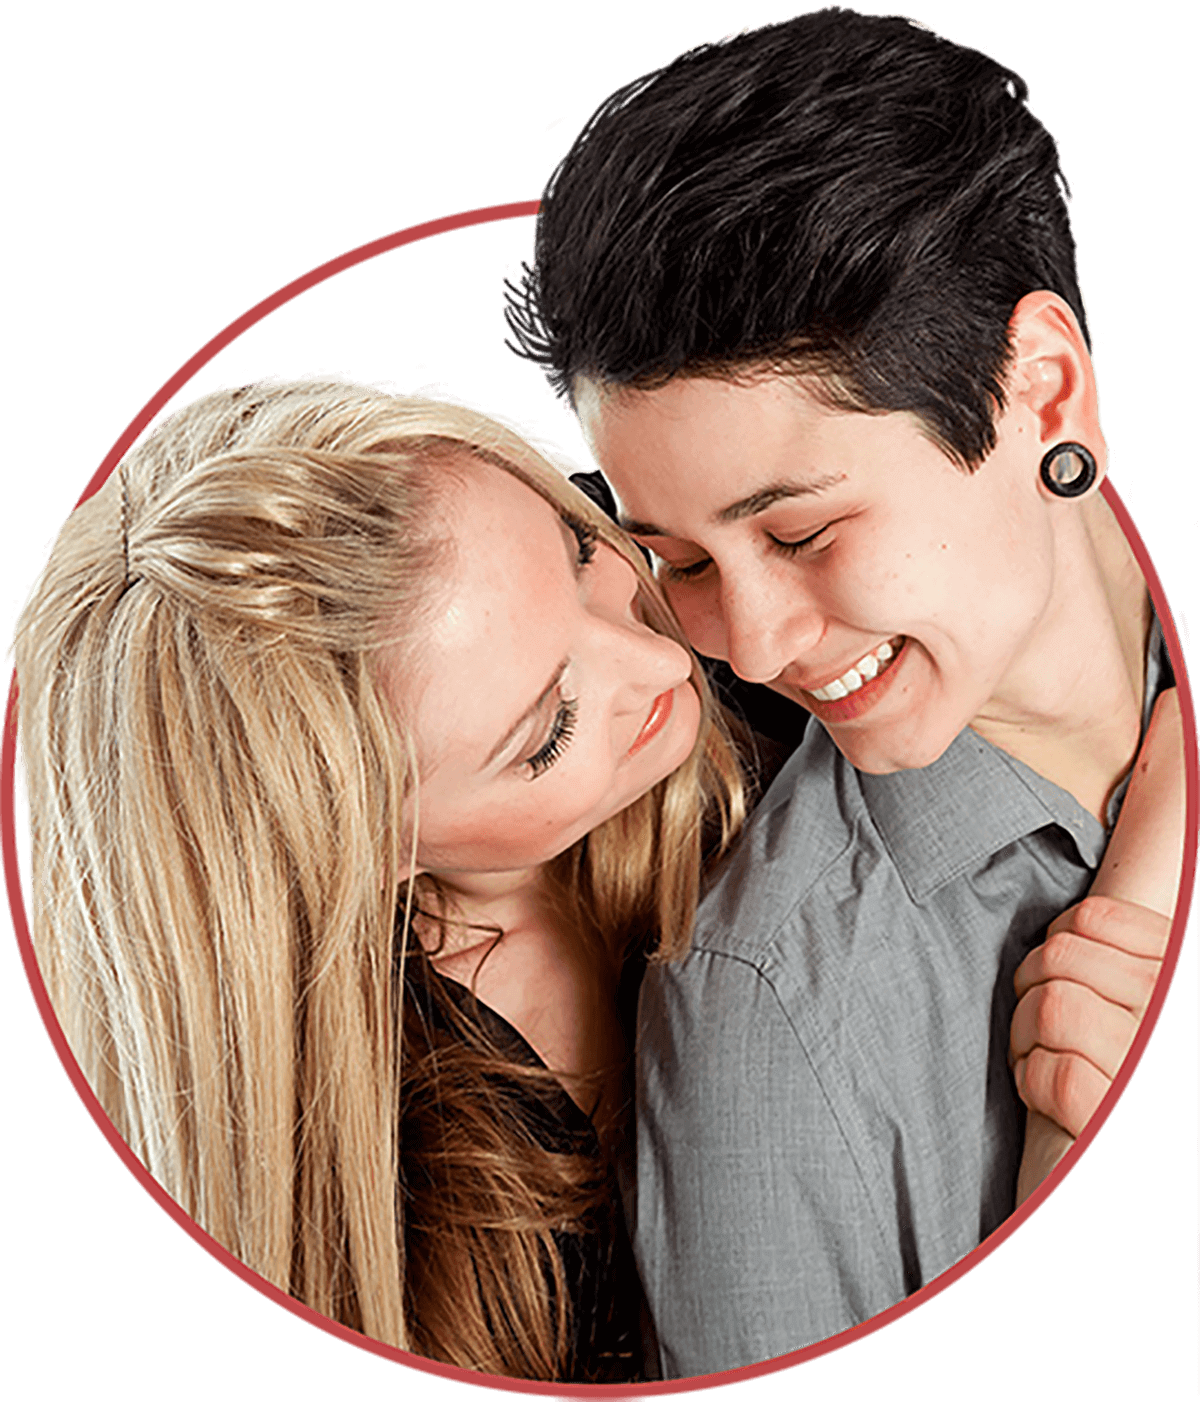 Lesbian dating online in Singapore